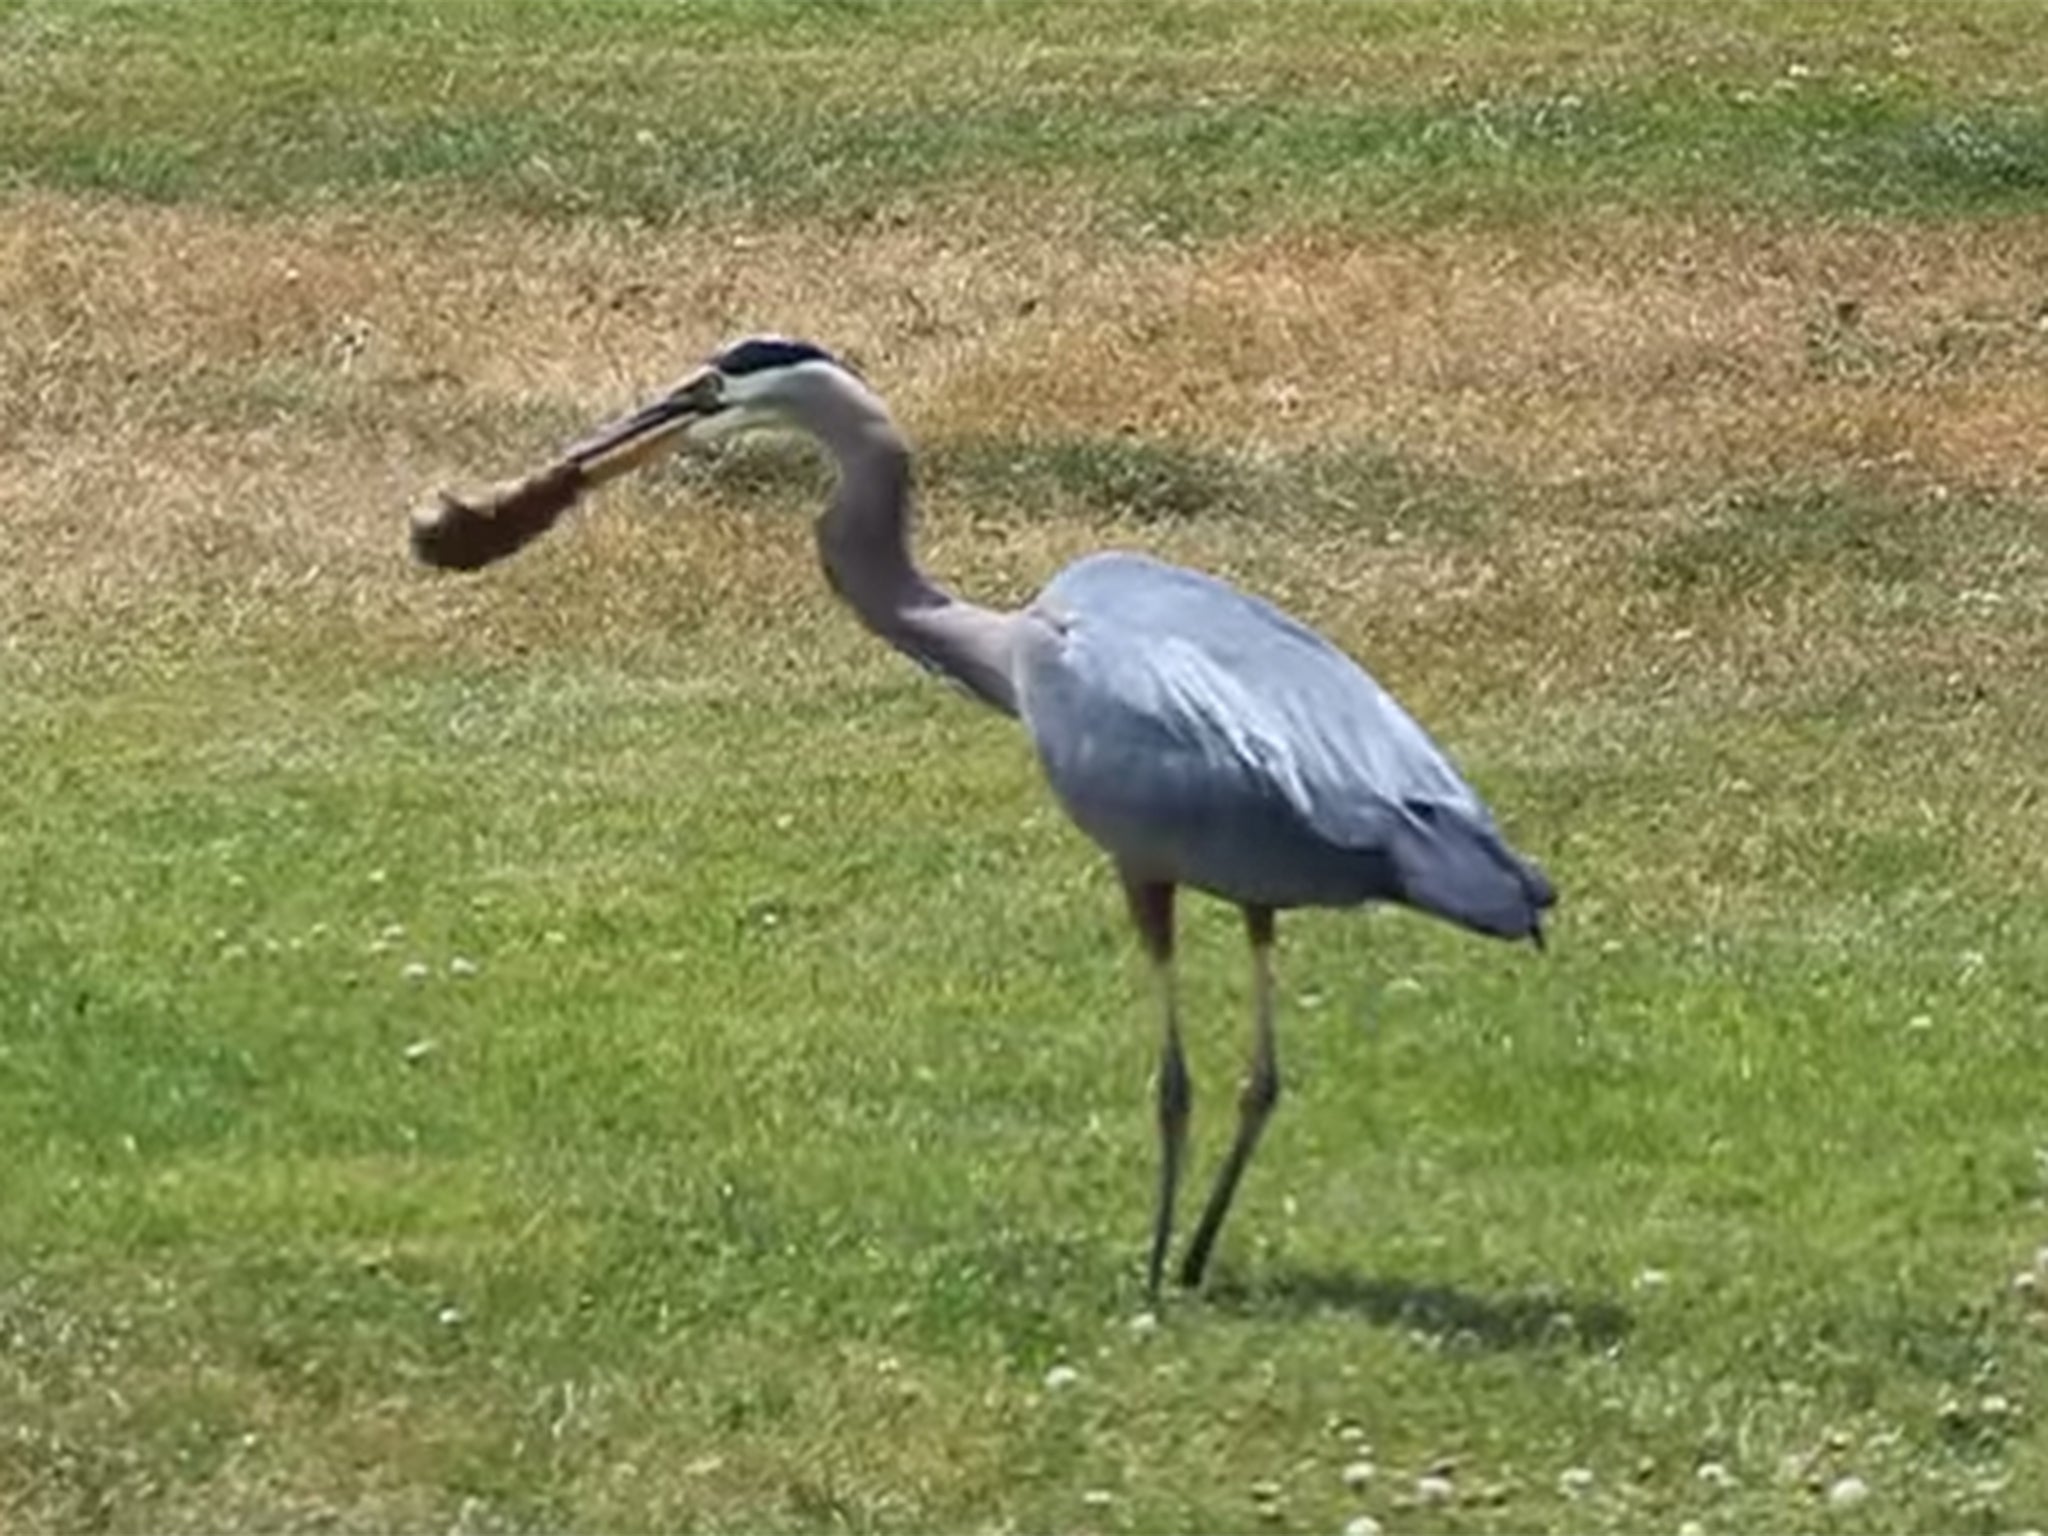 A blue heron wrangles with a gopher